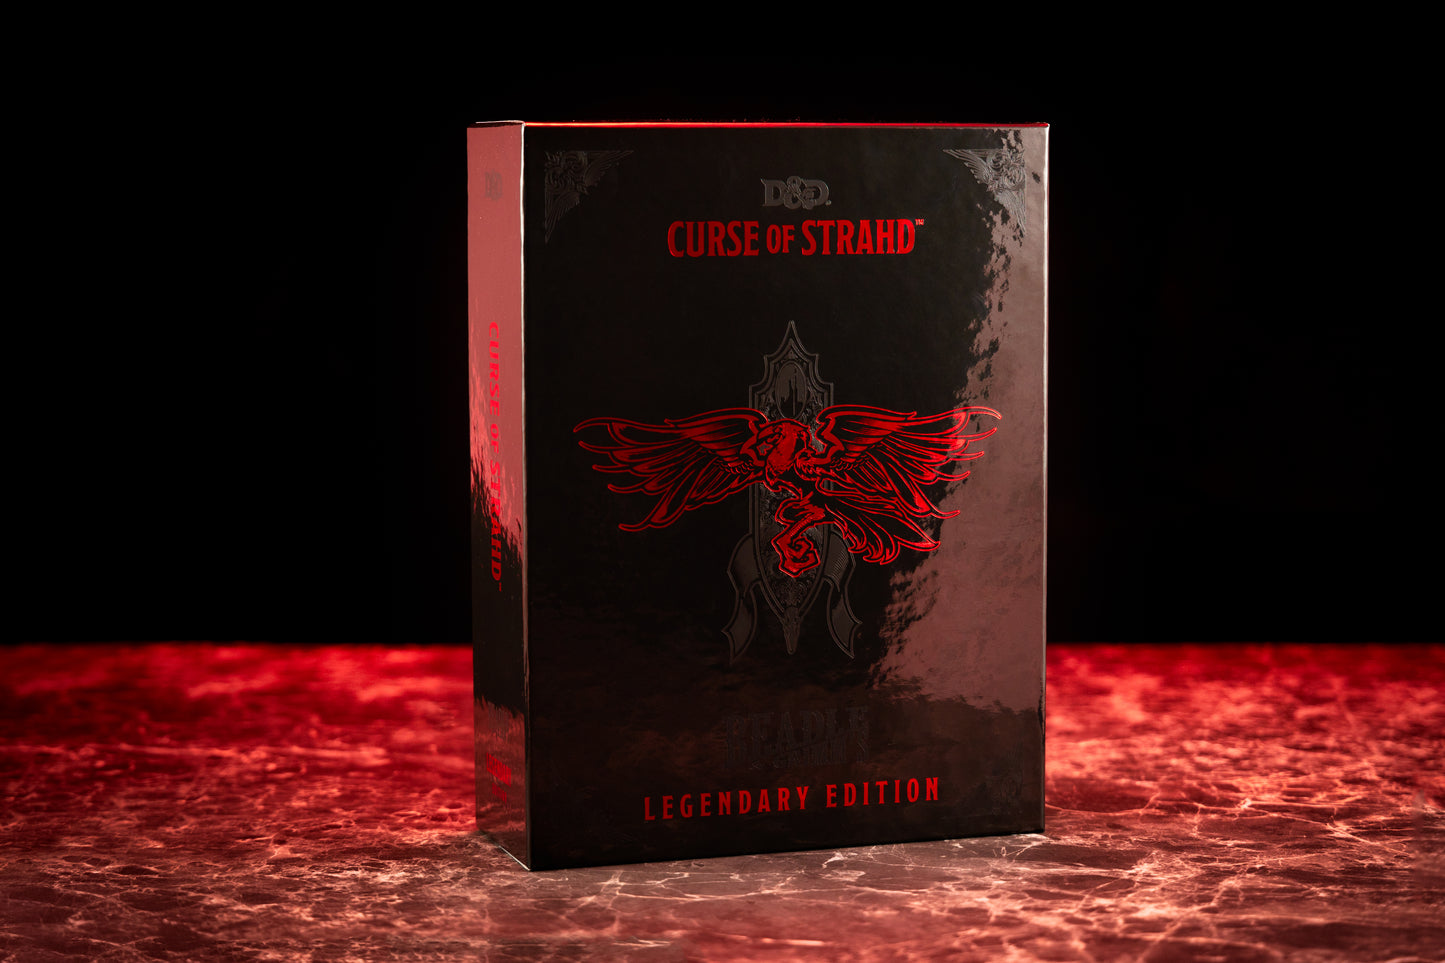 Curse of Strahd: (D&D Boxed Set) (Dungeons & Dragons) (Book